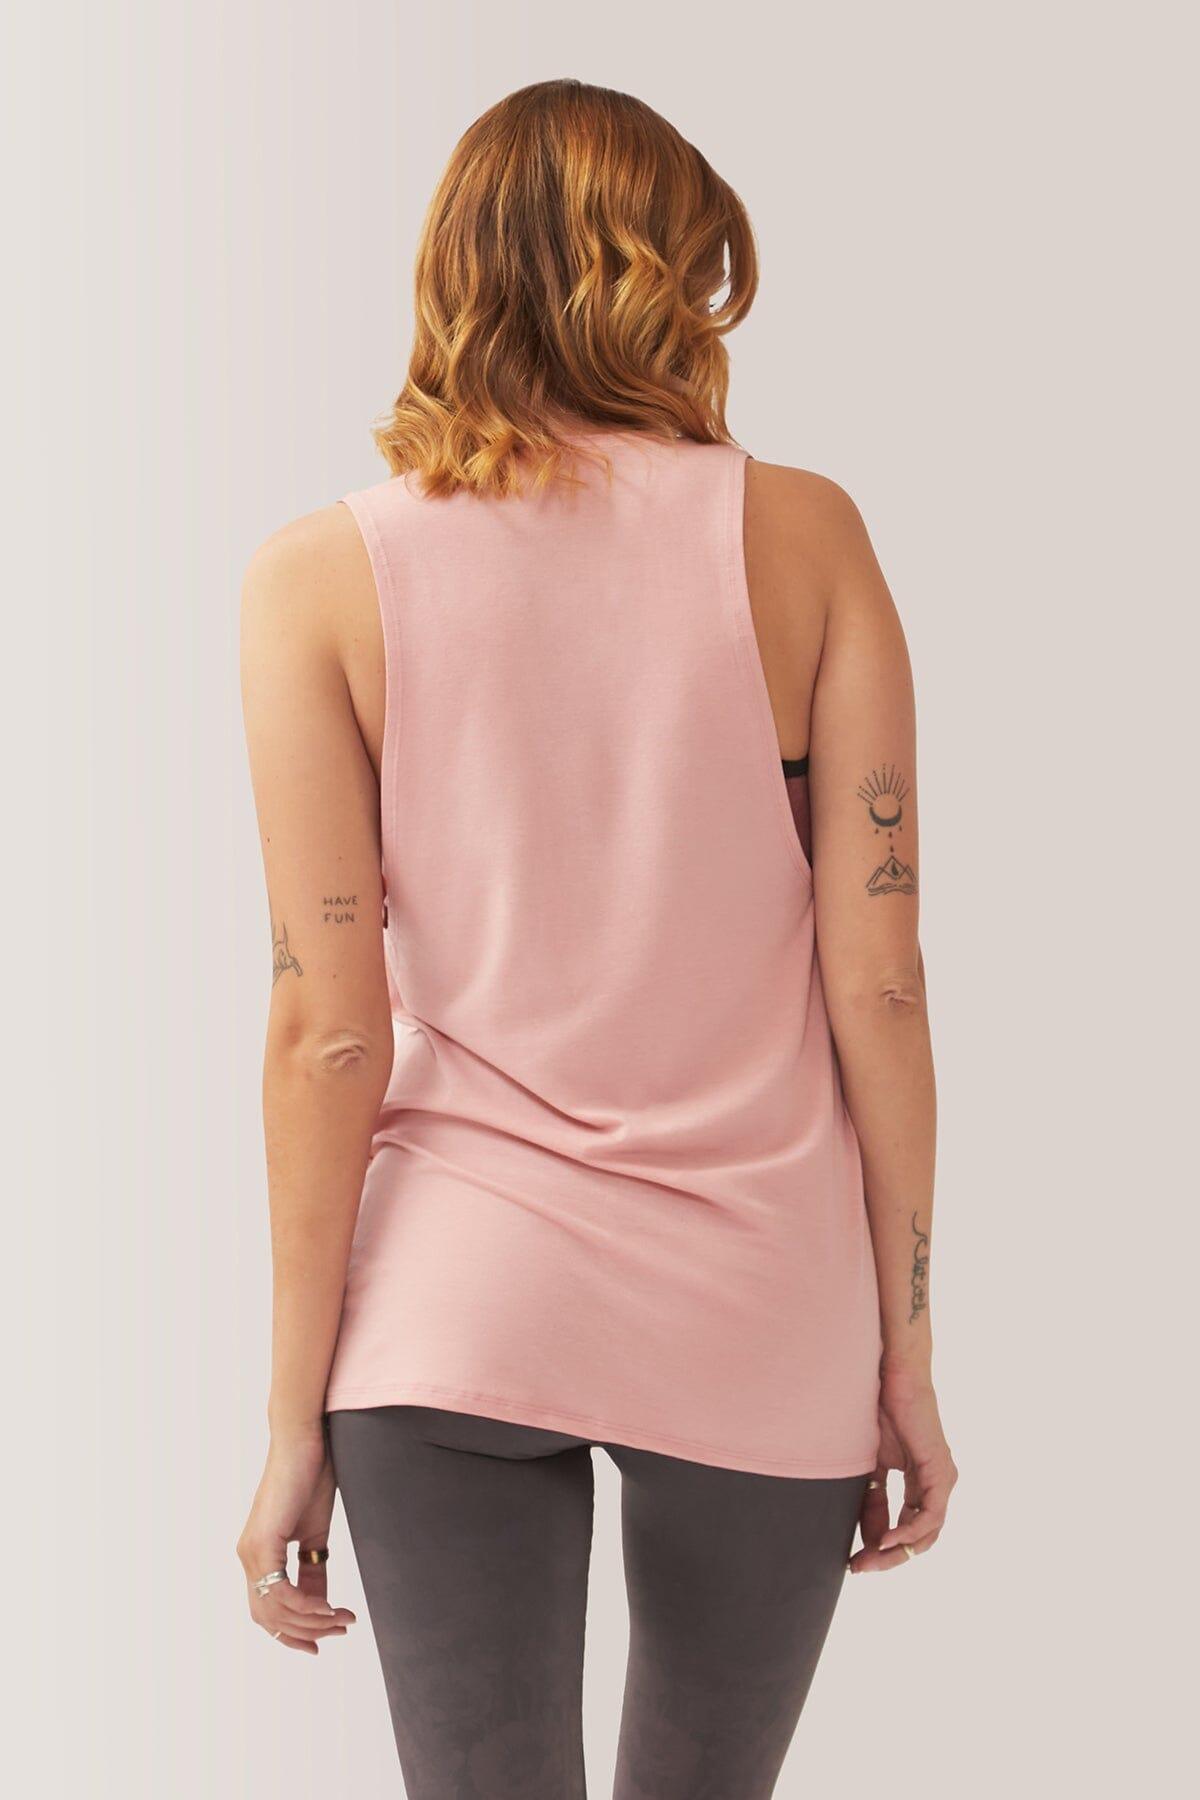 Femme qui porte la camisole Heart and Soul de Rose Boreal./ Women wearing the Heart and Soul tank top from Rose Boreal. -Rosebud